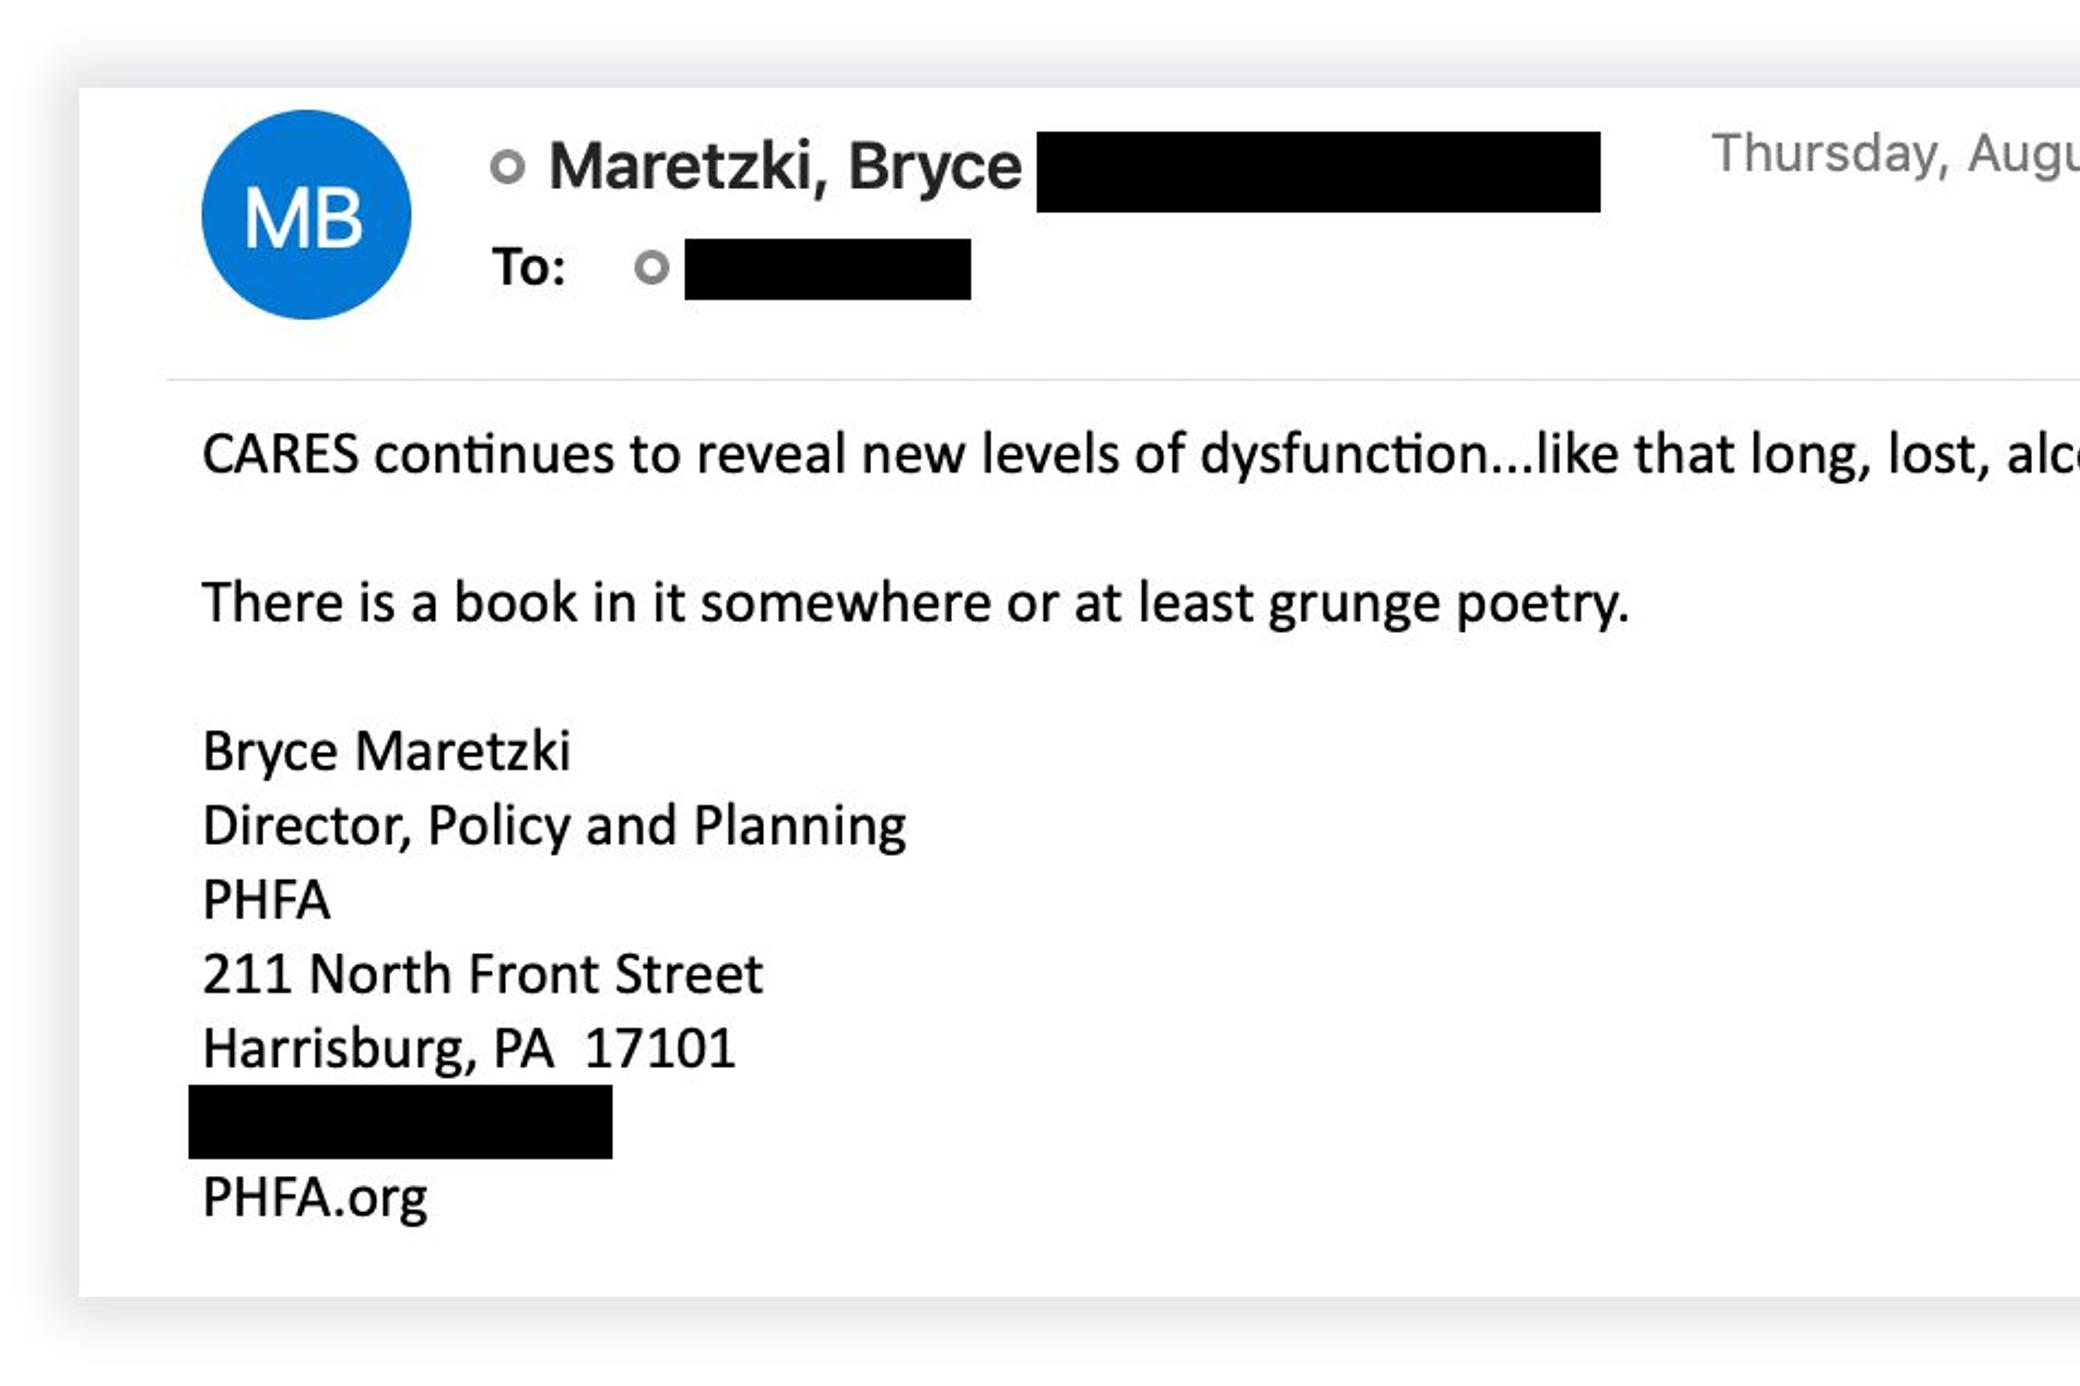 In an email, Bryce Maretzki, a senior official at the Pennsylvania Housing Finance Agency, complained about the problems of the state's CARES-funded rental assistance program